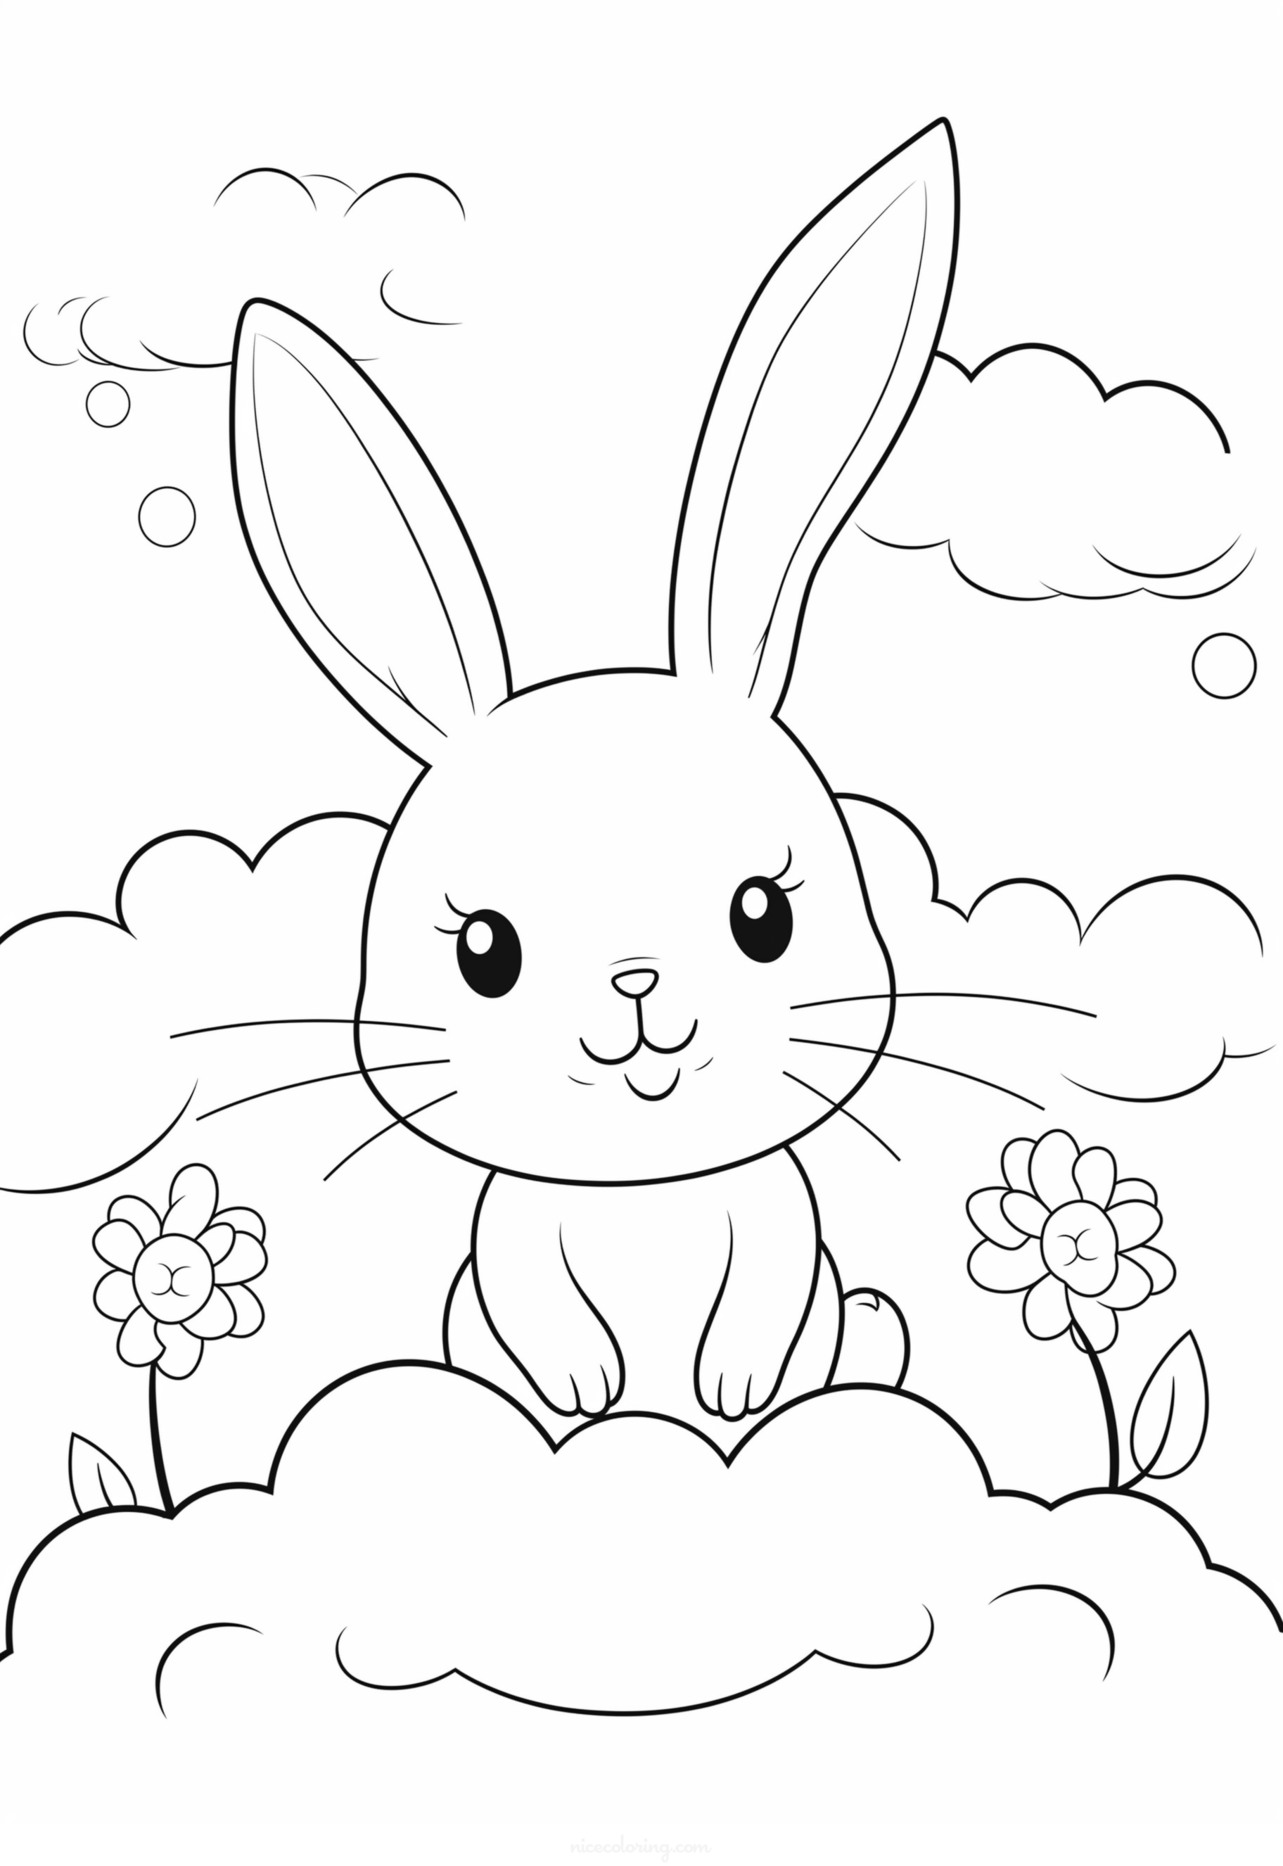 Cute rabbit surrounded by flowers coloring page